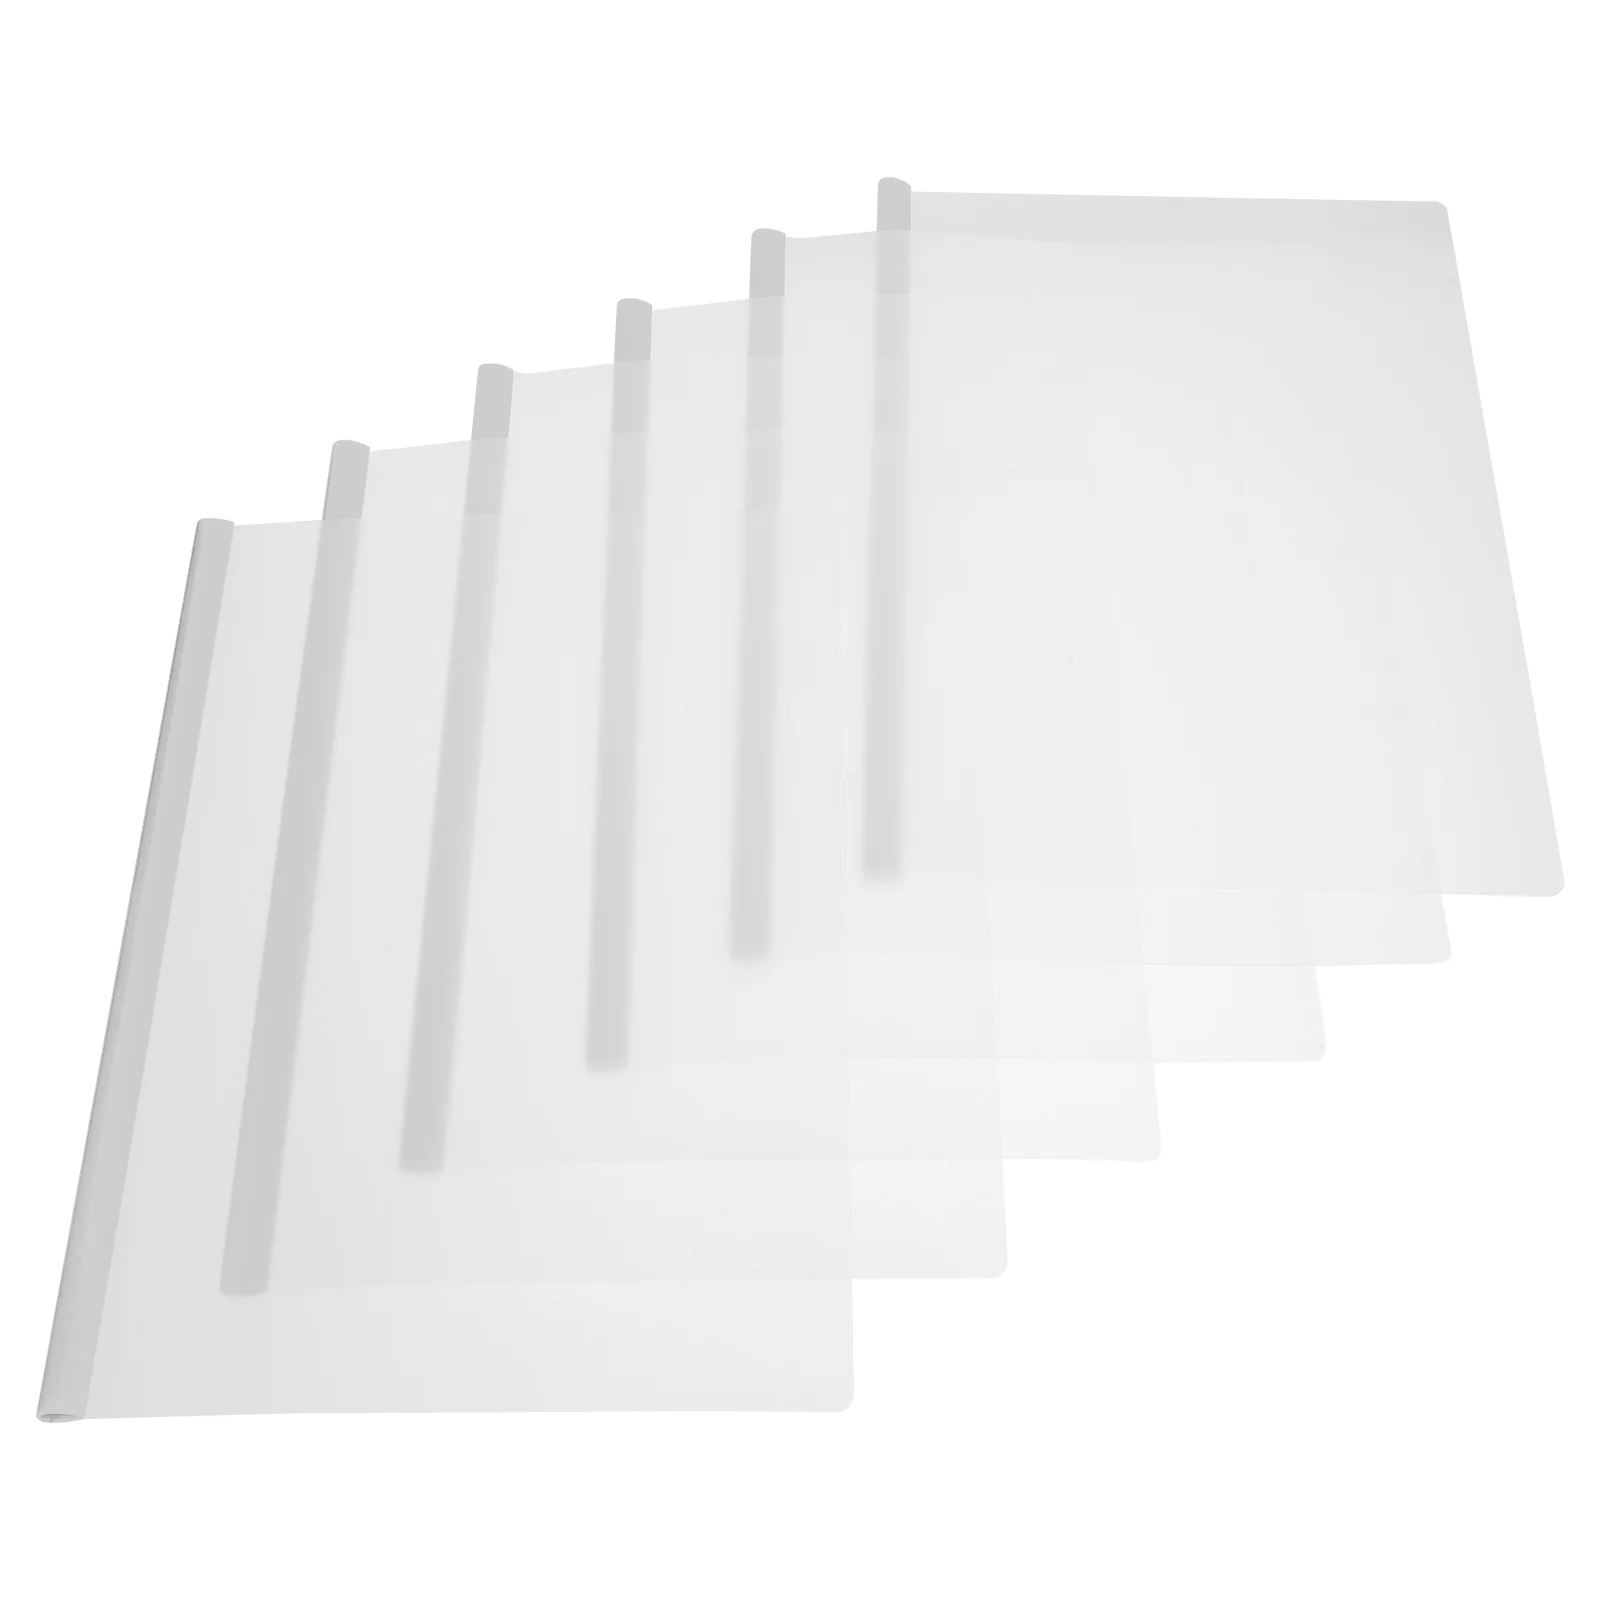 

10pcs Clear Report Covers for A4 Paper Multi-function File Folders with Sliding Bars File Covers